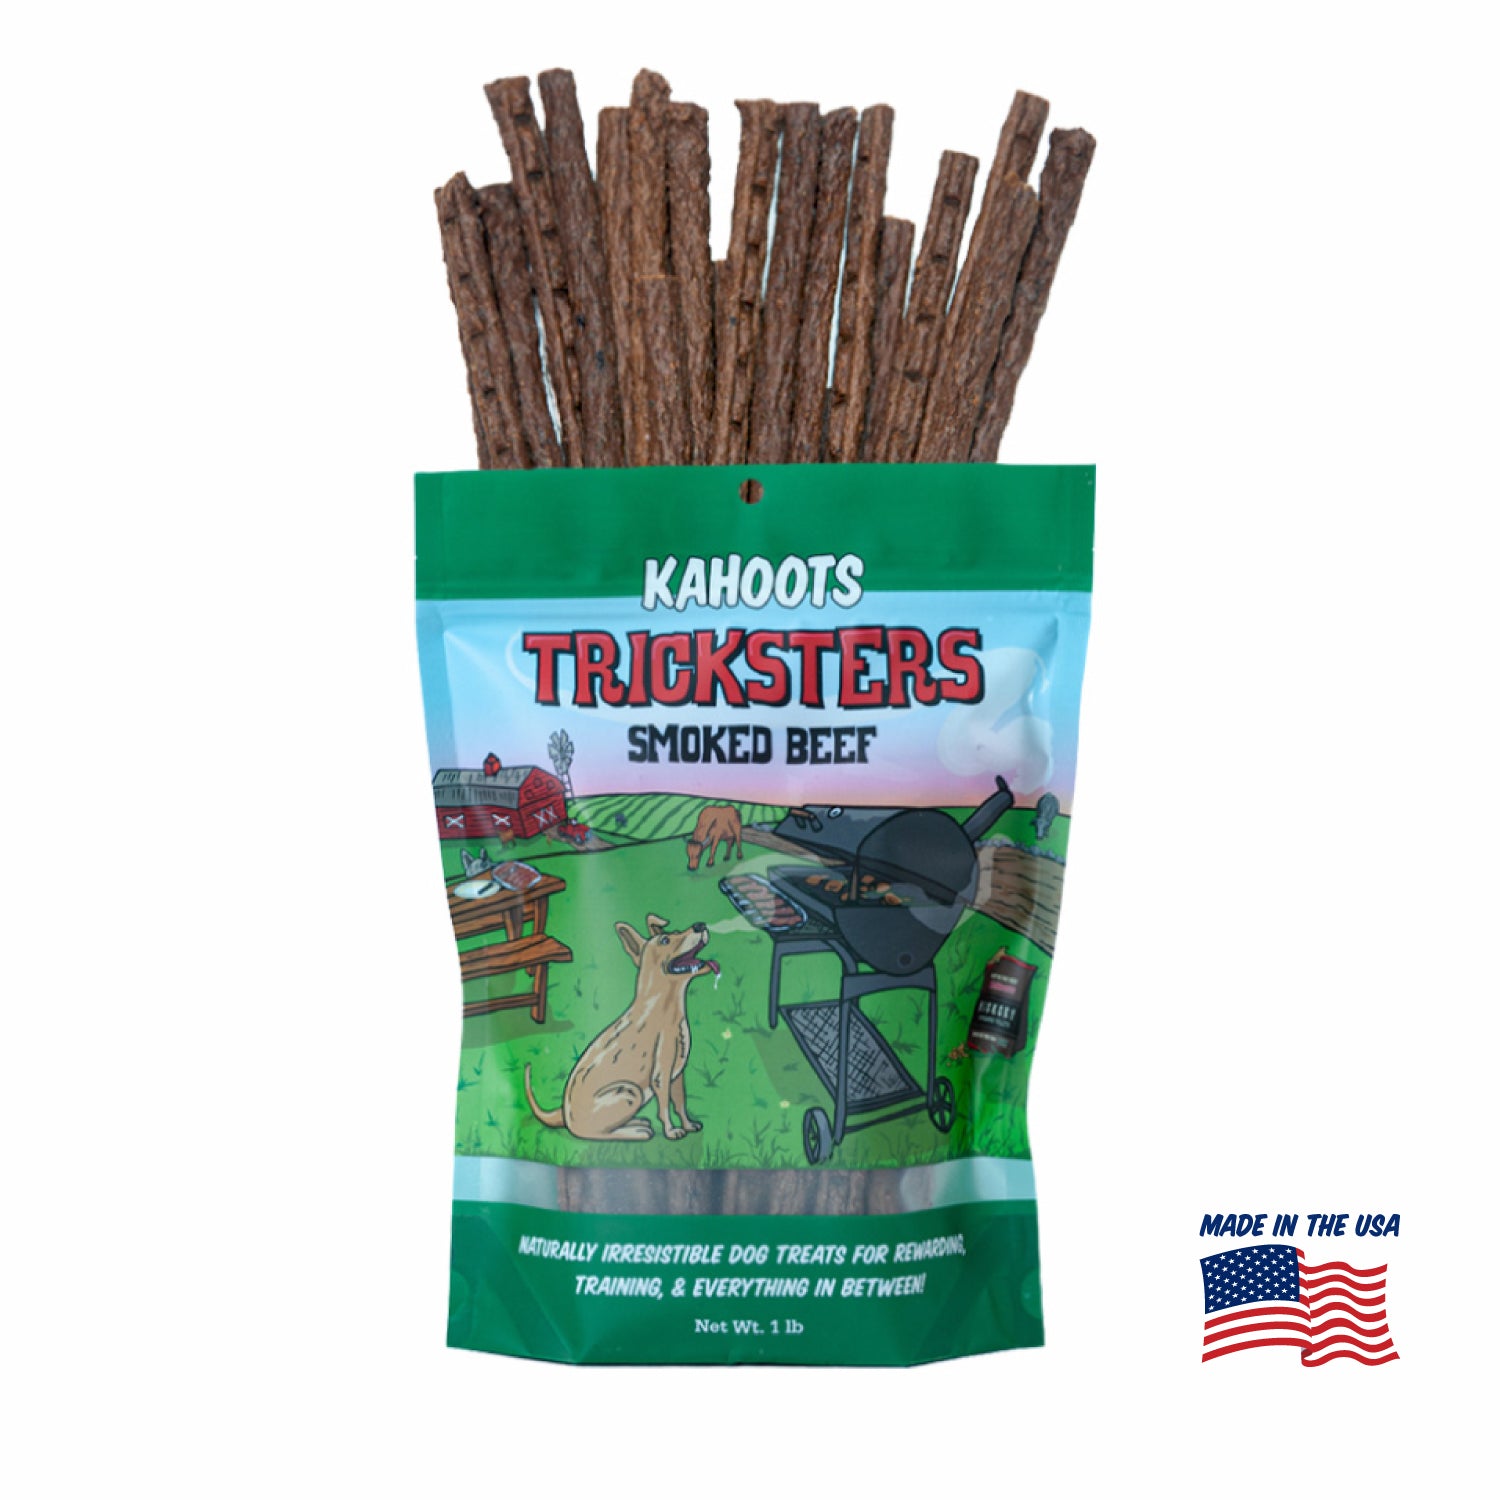 Kahoots beef tricksters packaging. Made in the USA